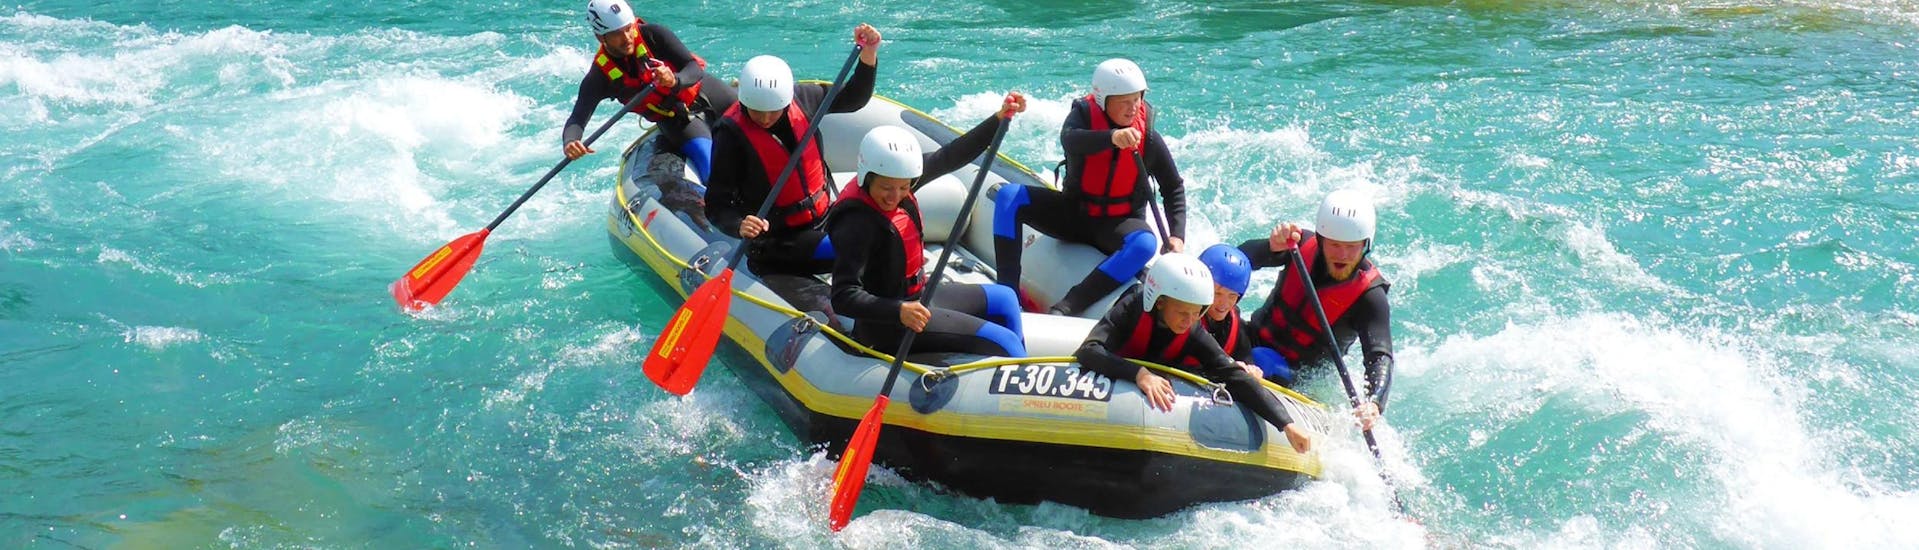 Rafting & Canyoning Family Package in Zillertal.